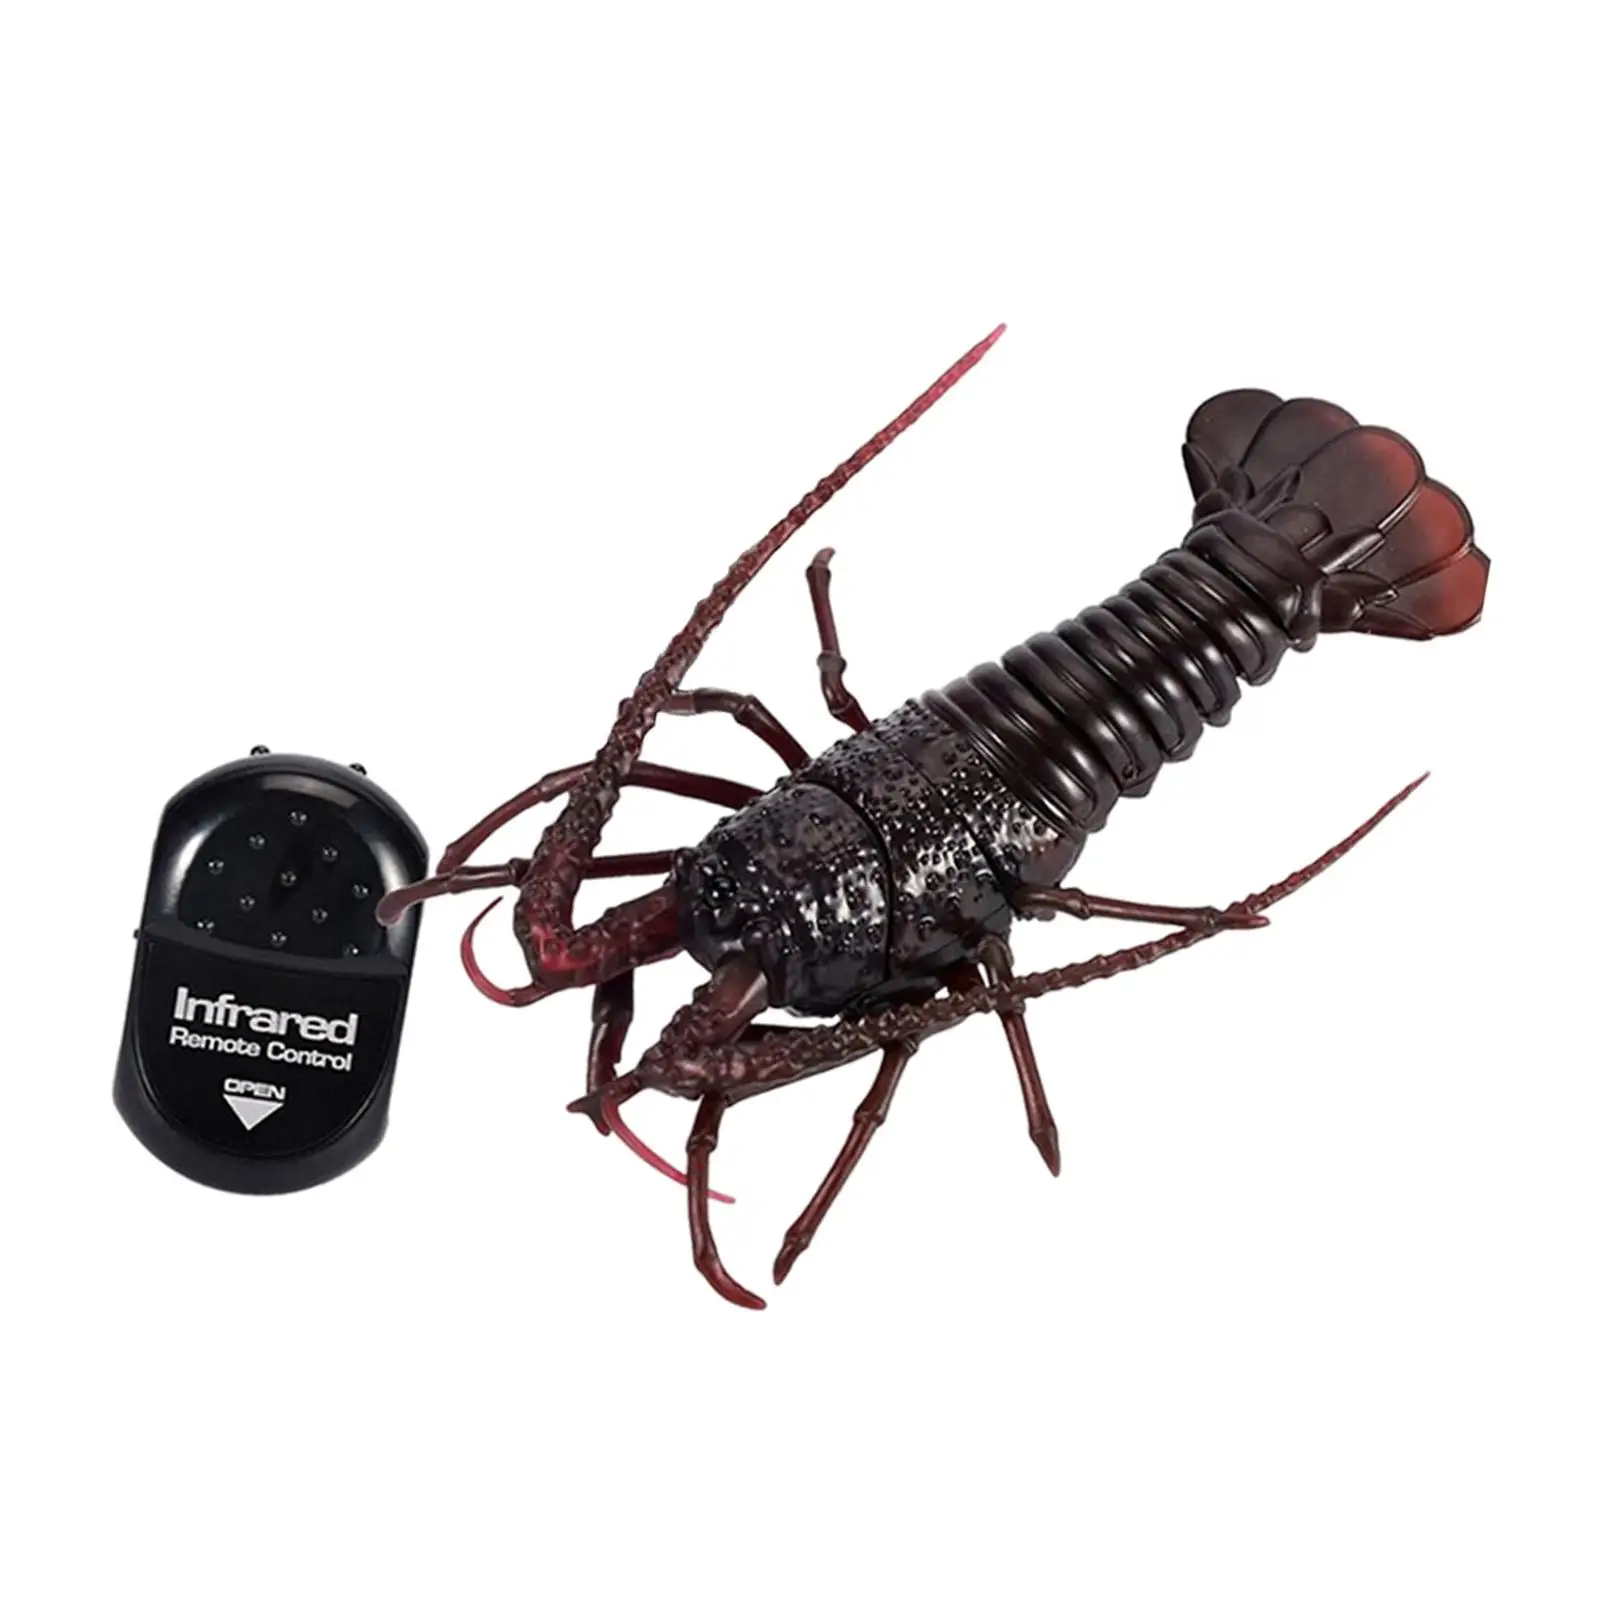 Simulation RC Crawfish Realistic Remote Control Vehicle Car Animal Electric Infrared RC Shrimp for Toddler Kids Birthday Gifts